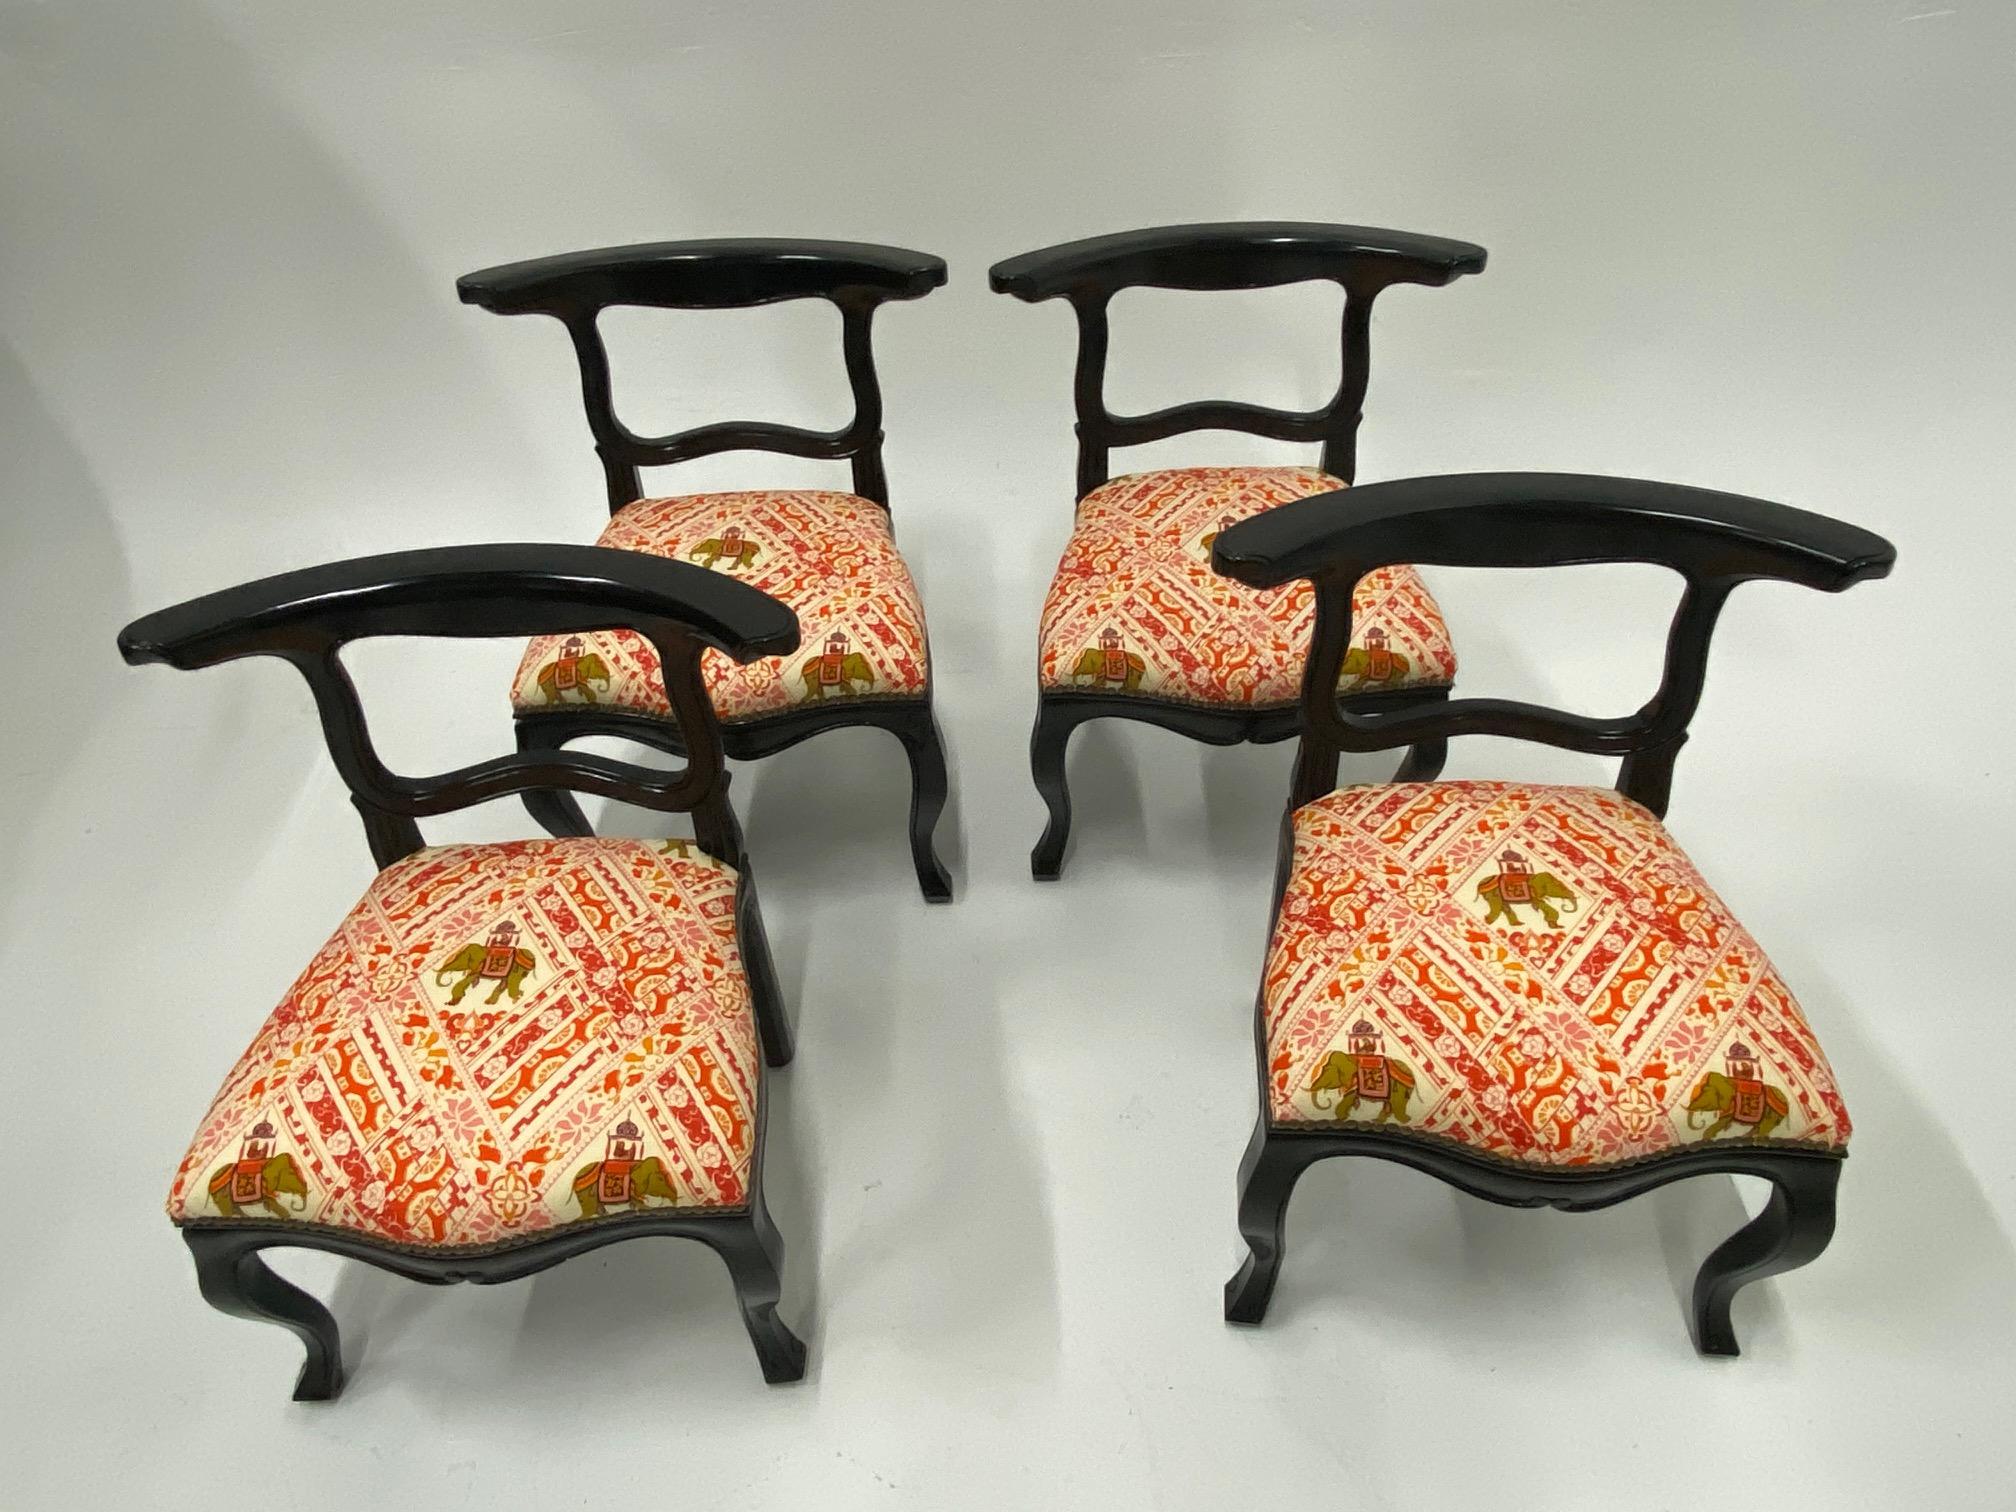 Very chic set of 4 ebonized Hollywood Regency slipper chairs having an oriental stylized silhouette, cabriole legs, and fabulous new elephant motif upholstery. Beautiful from every angle.